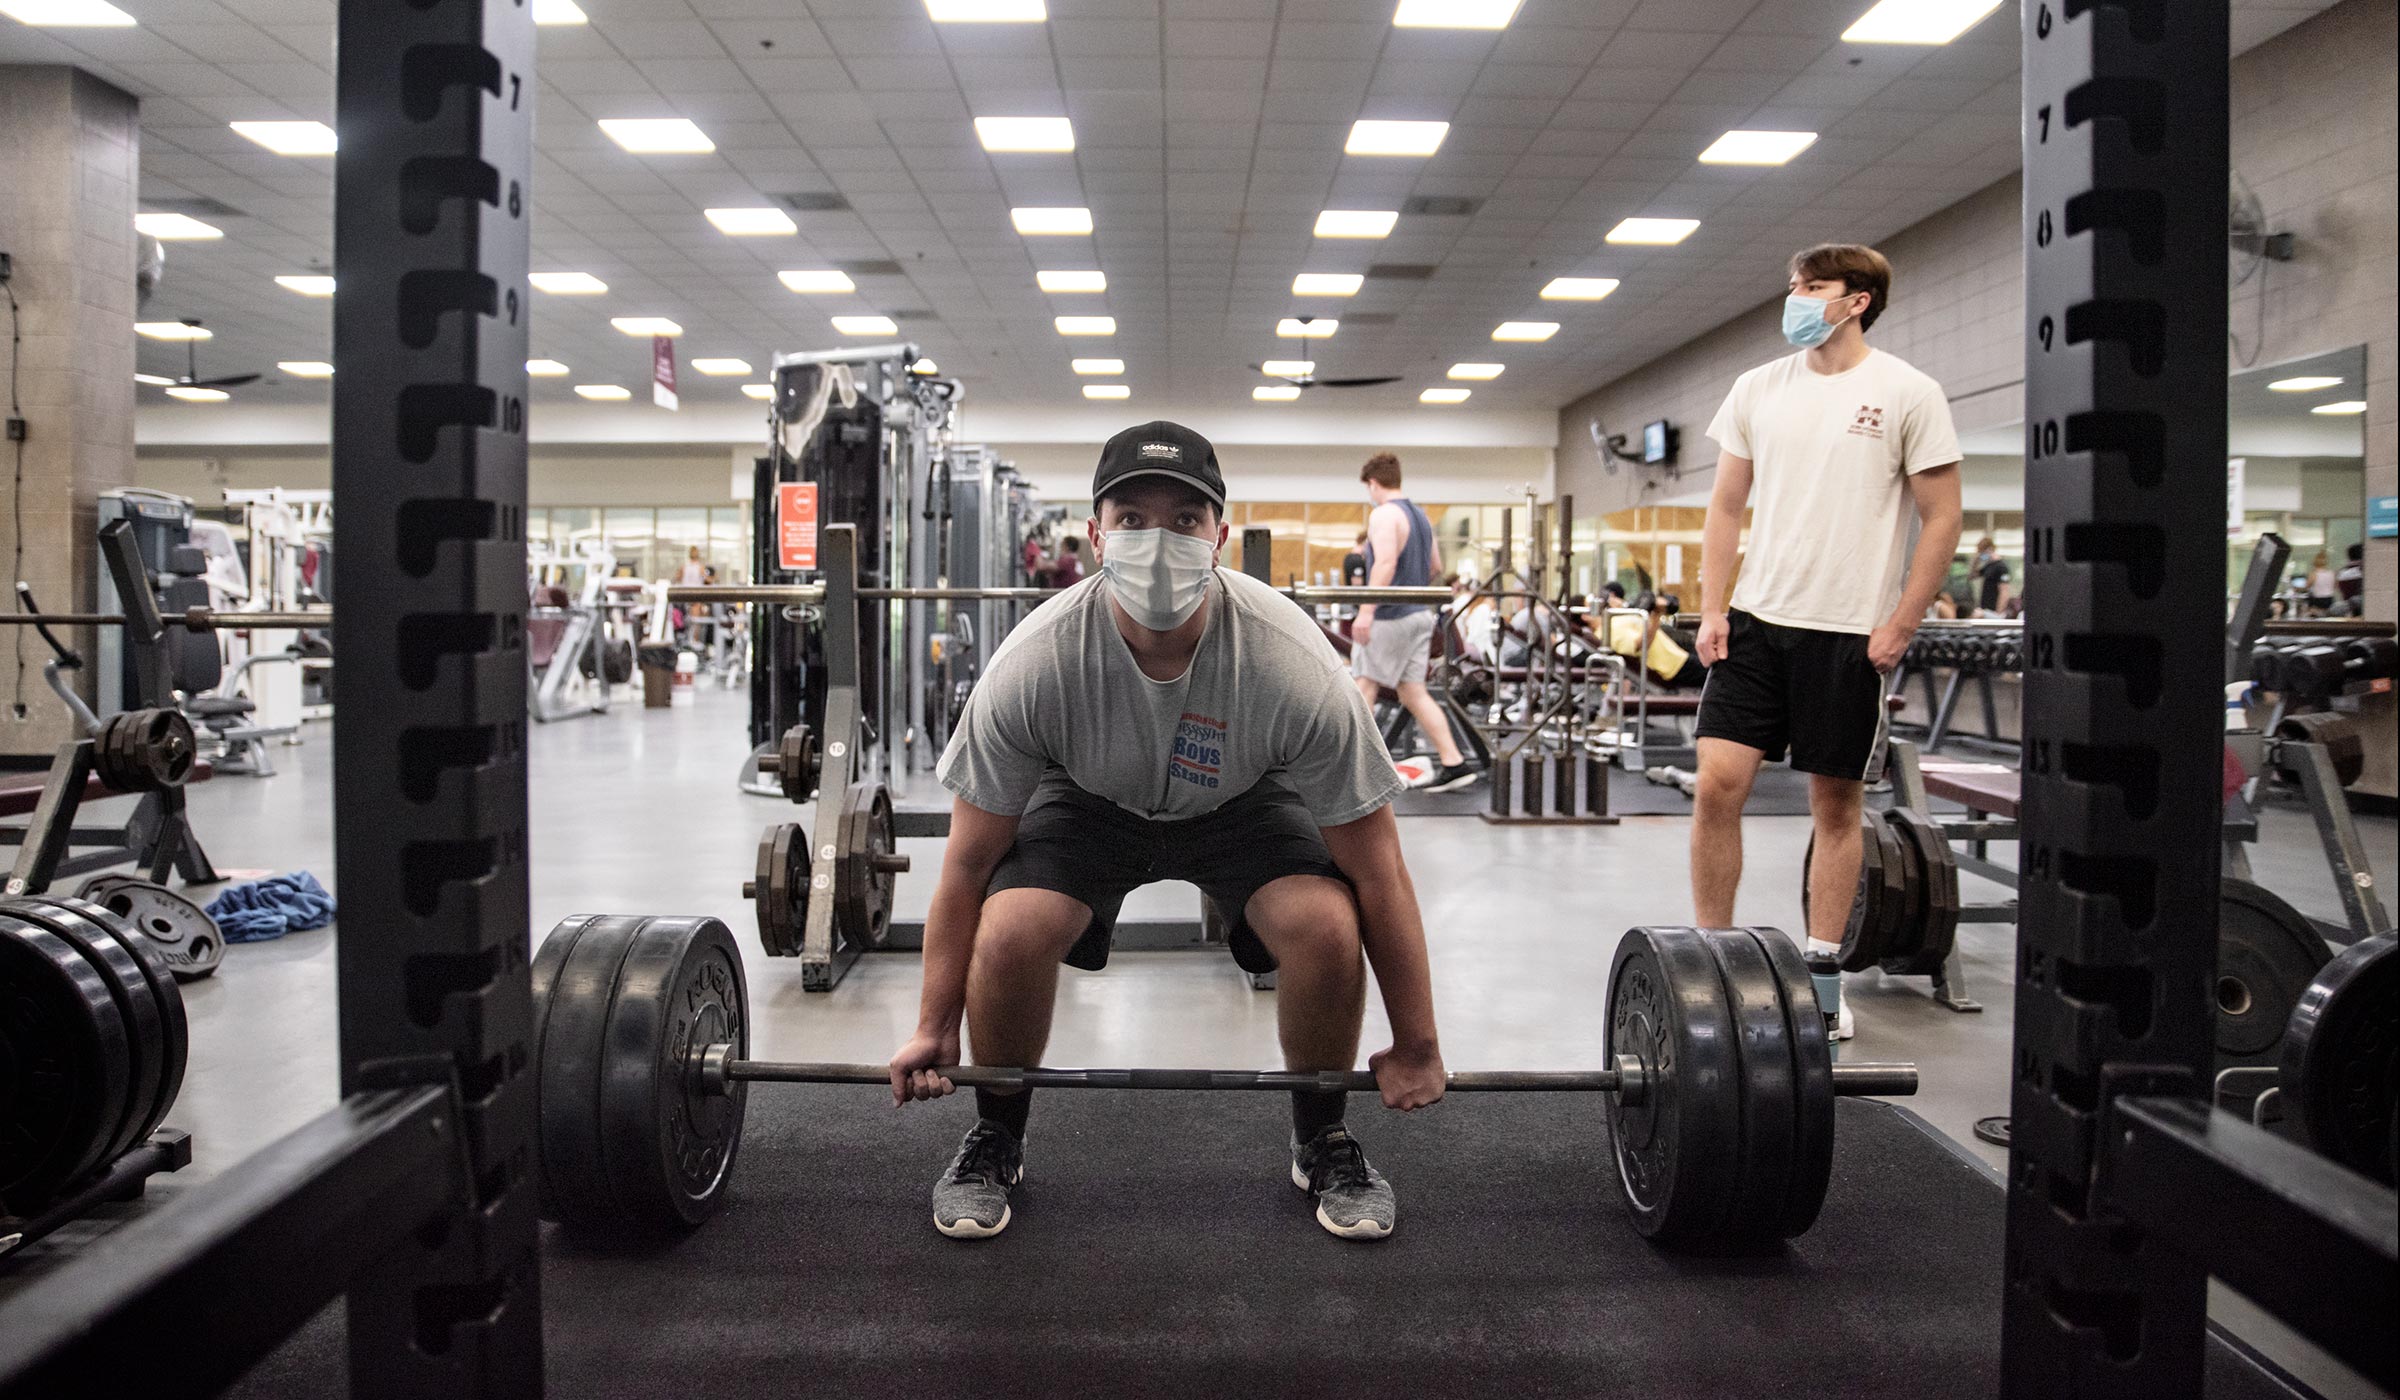 Masked student lifts heavy weights in Sanderson weight room.